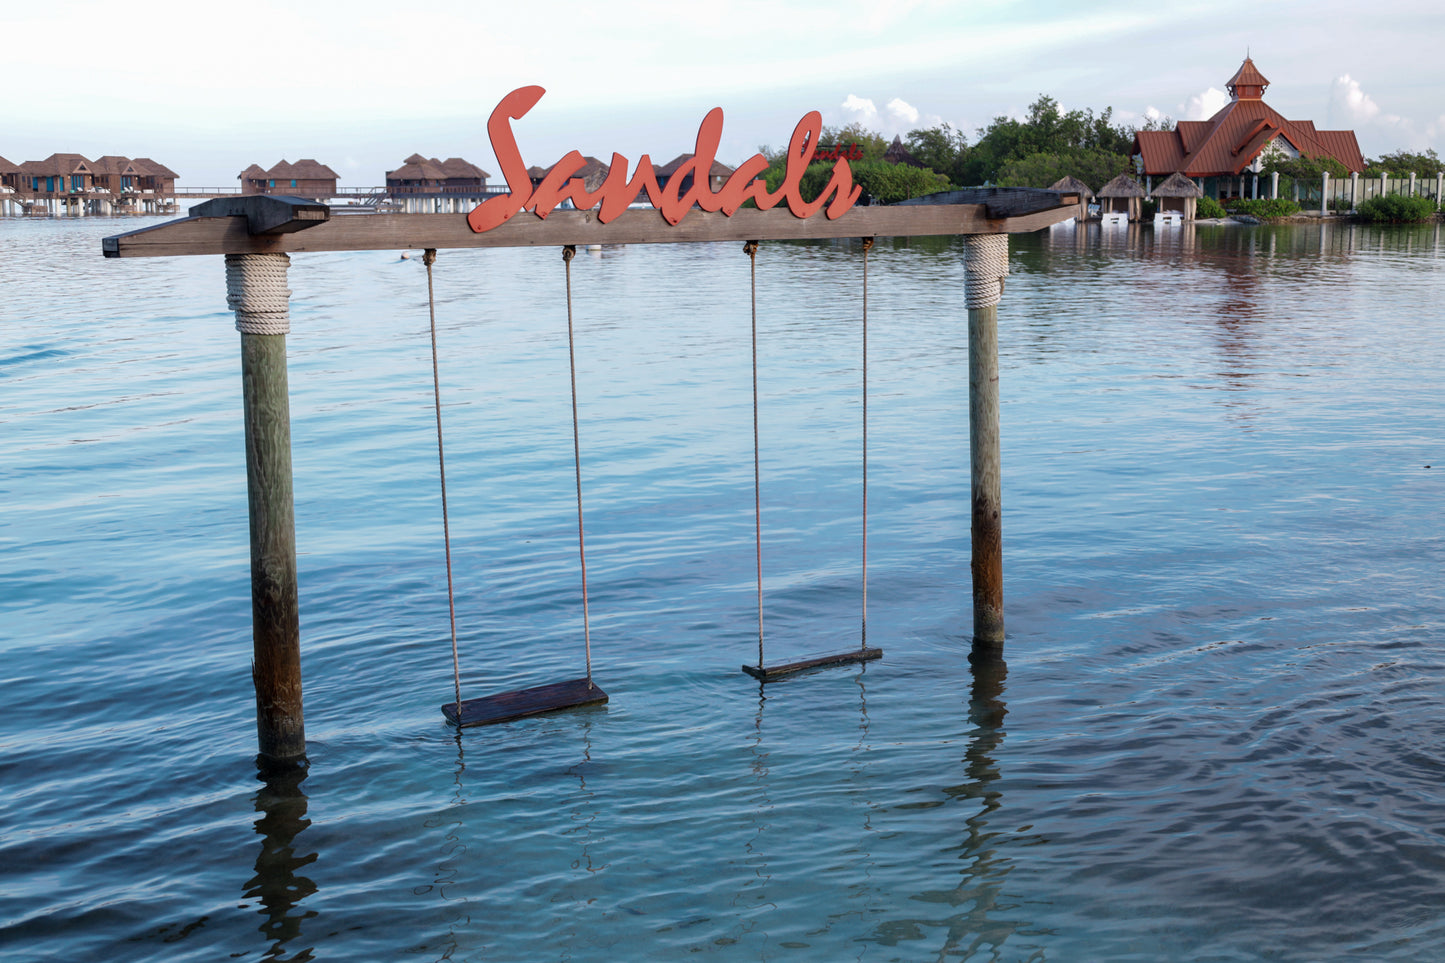 Sandals Royale Caribbean Montego Bay, Jamaica Photography 20x30 and 16x20